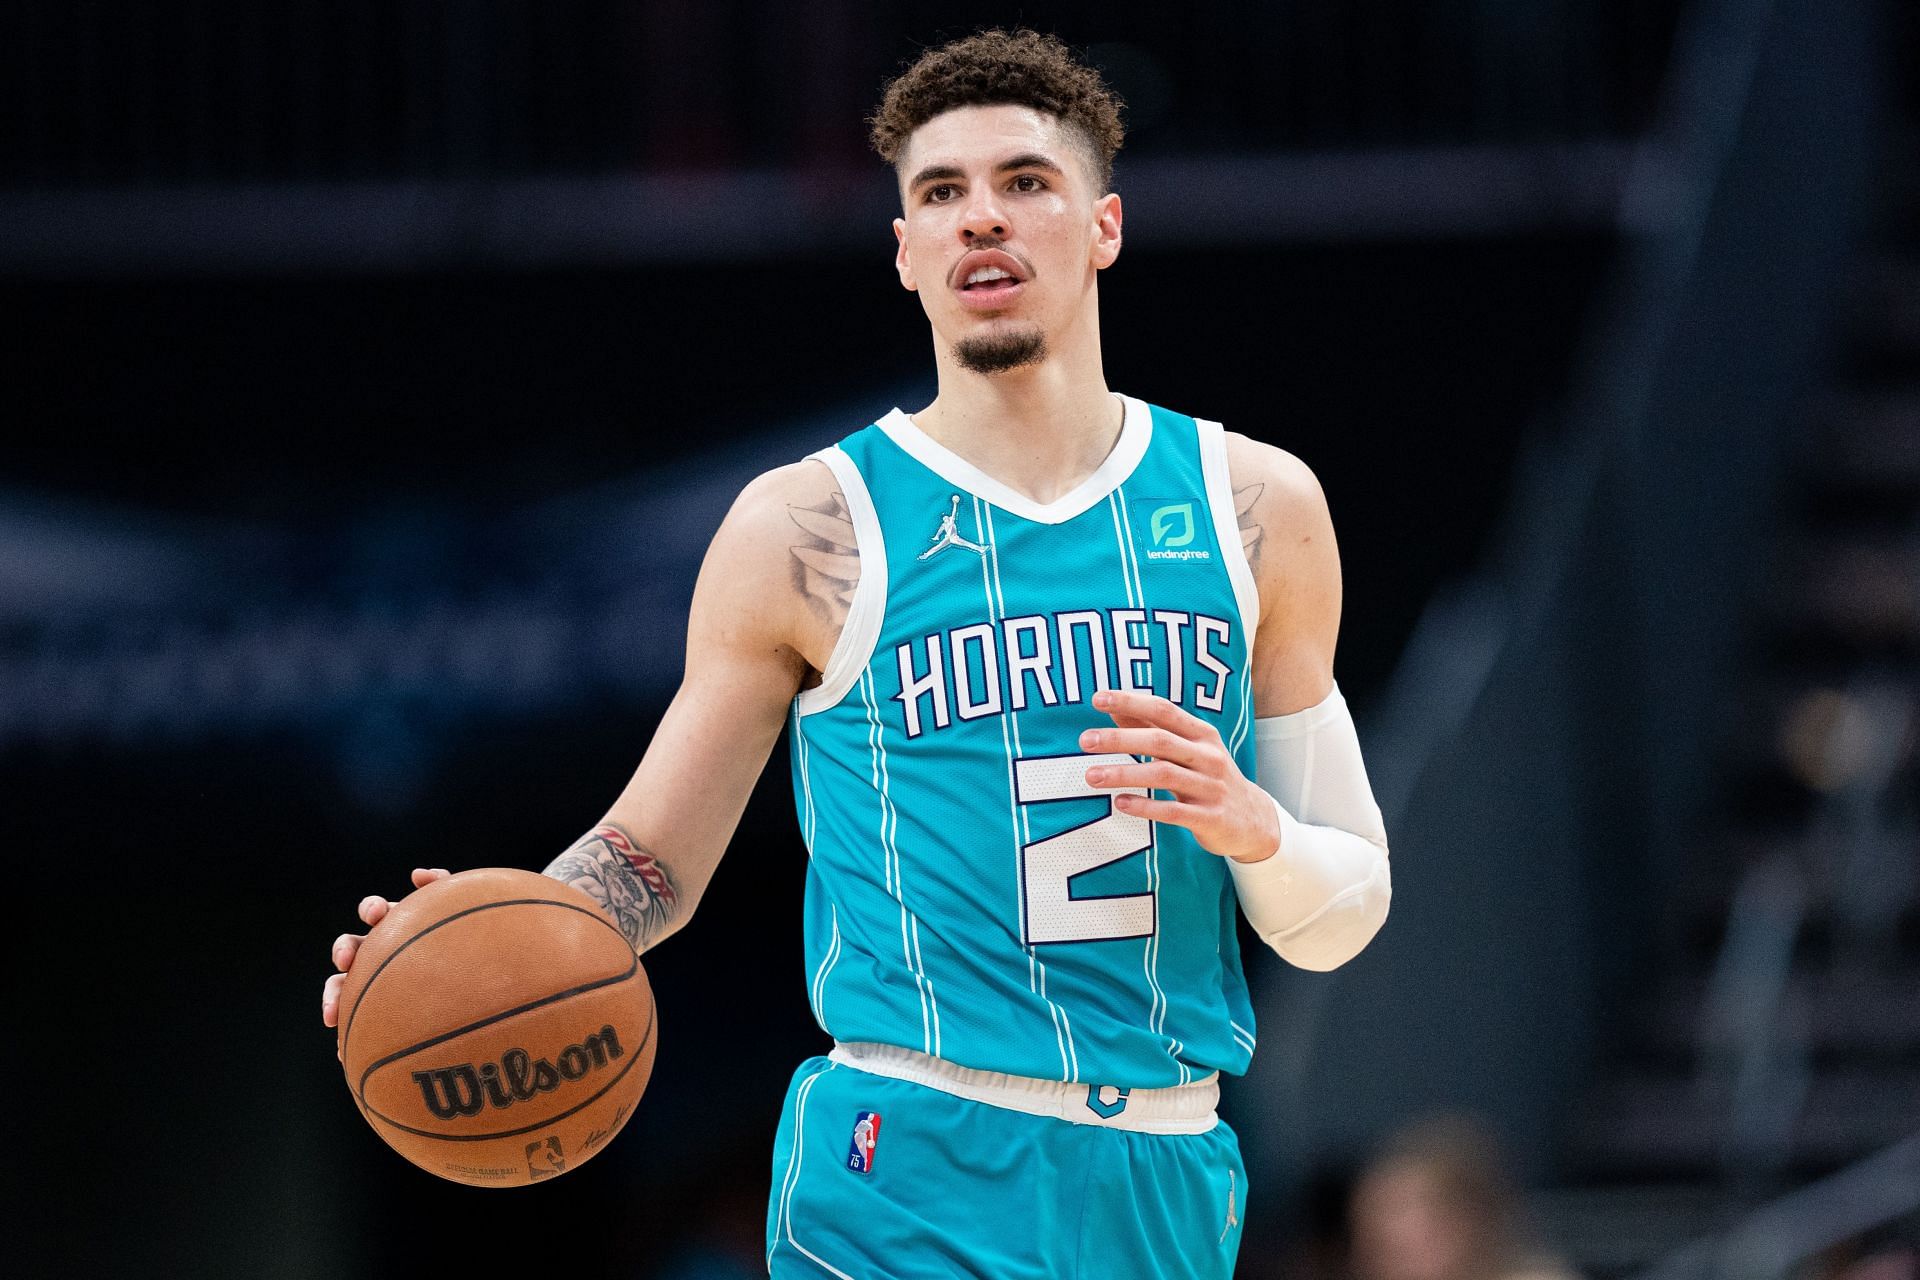 LaMelo Ball of the Charlotte Hornets.